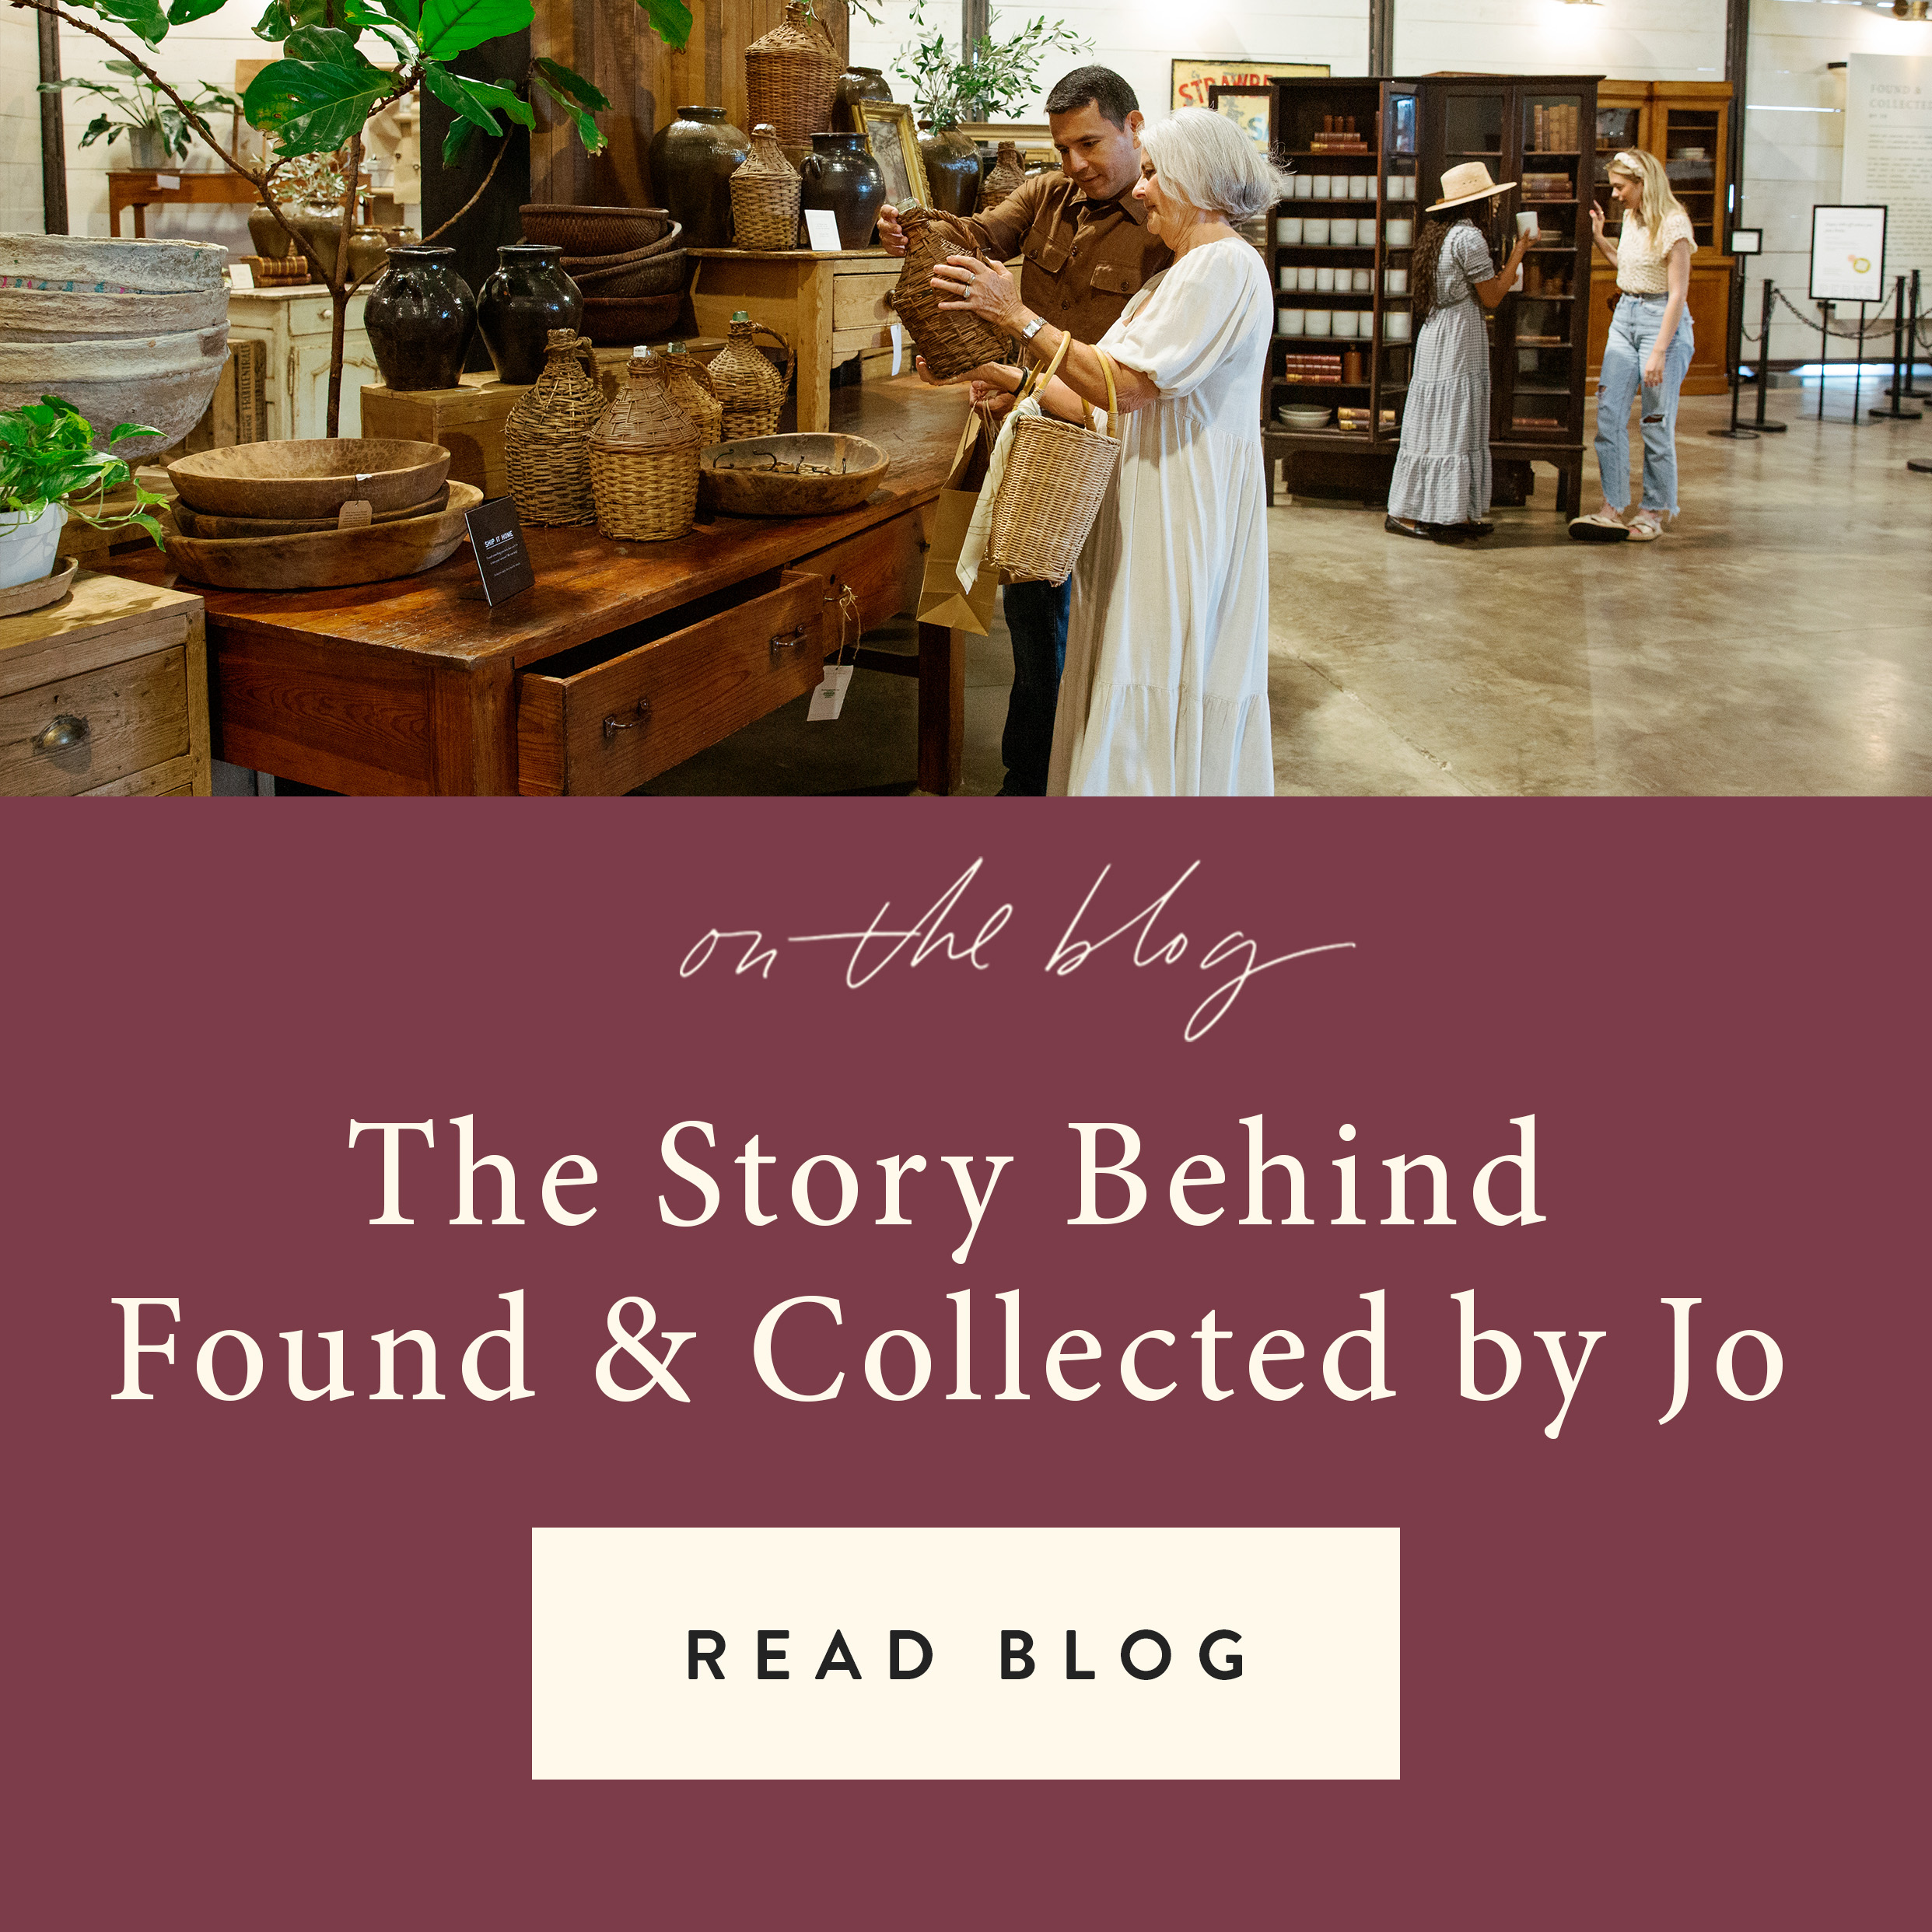 on the blog - the story behind found & collected by Jo - Read Blog